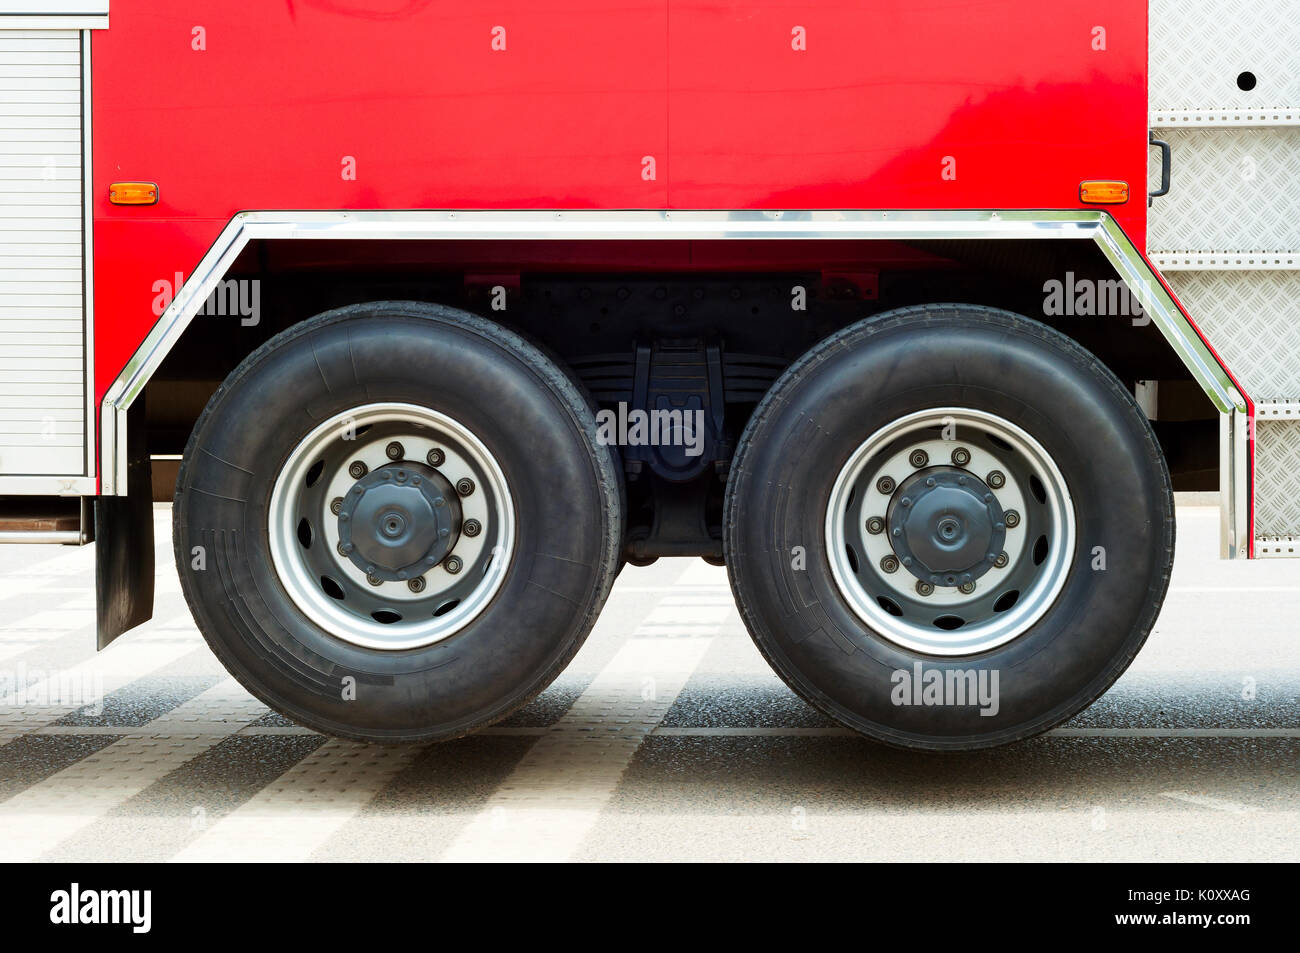 Fire truck partial feature, large area of red and wheels. Stock Photo